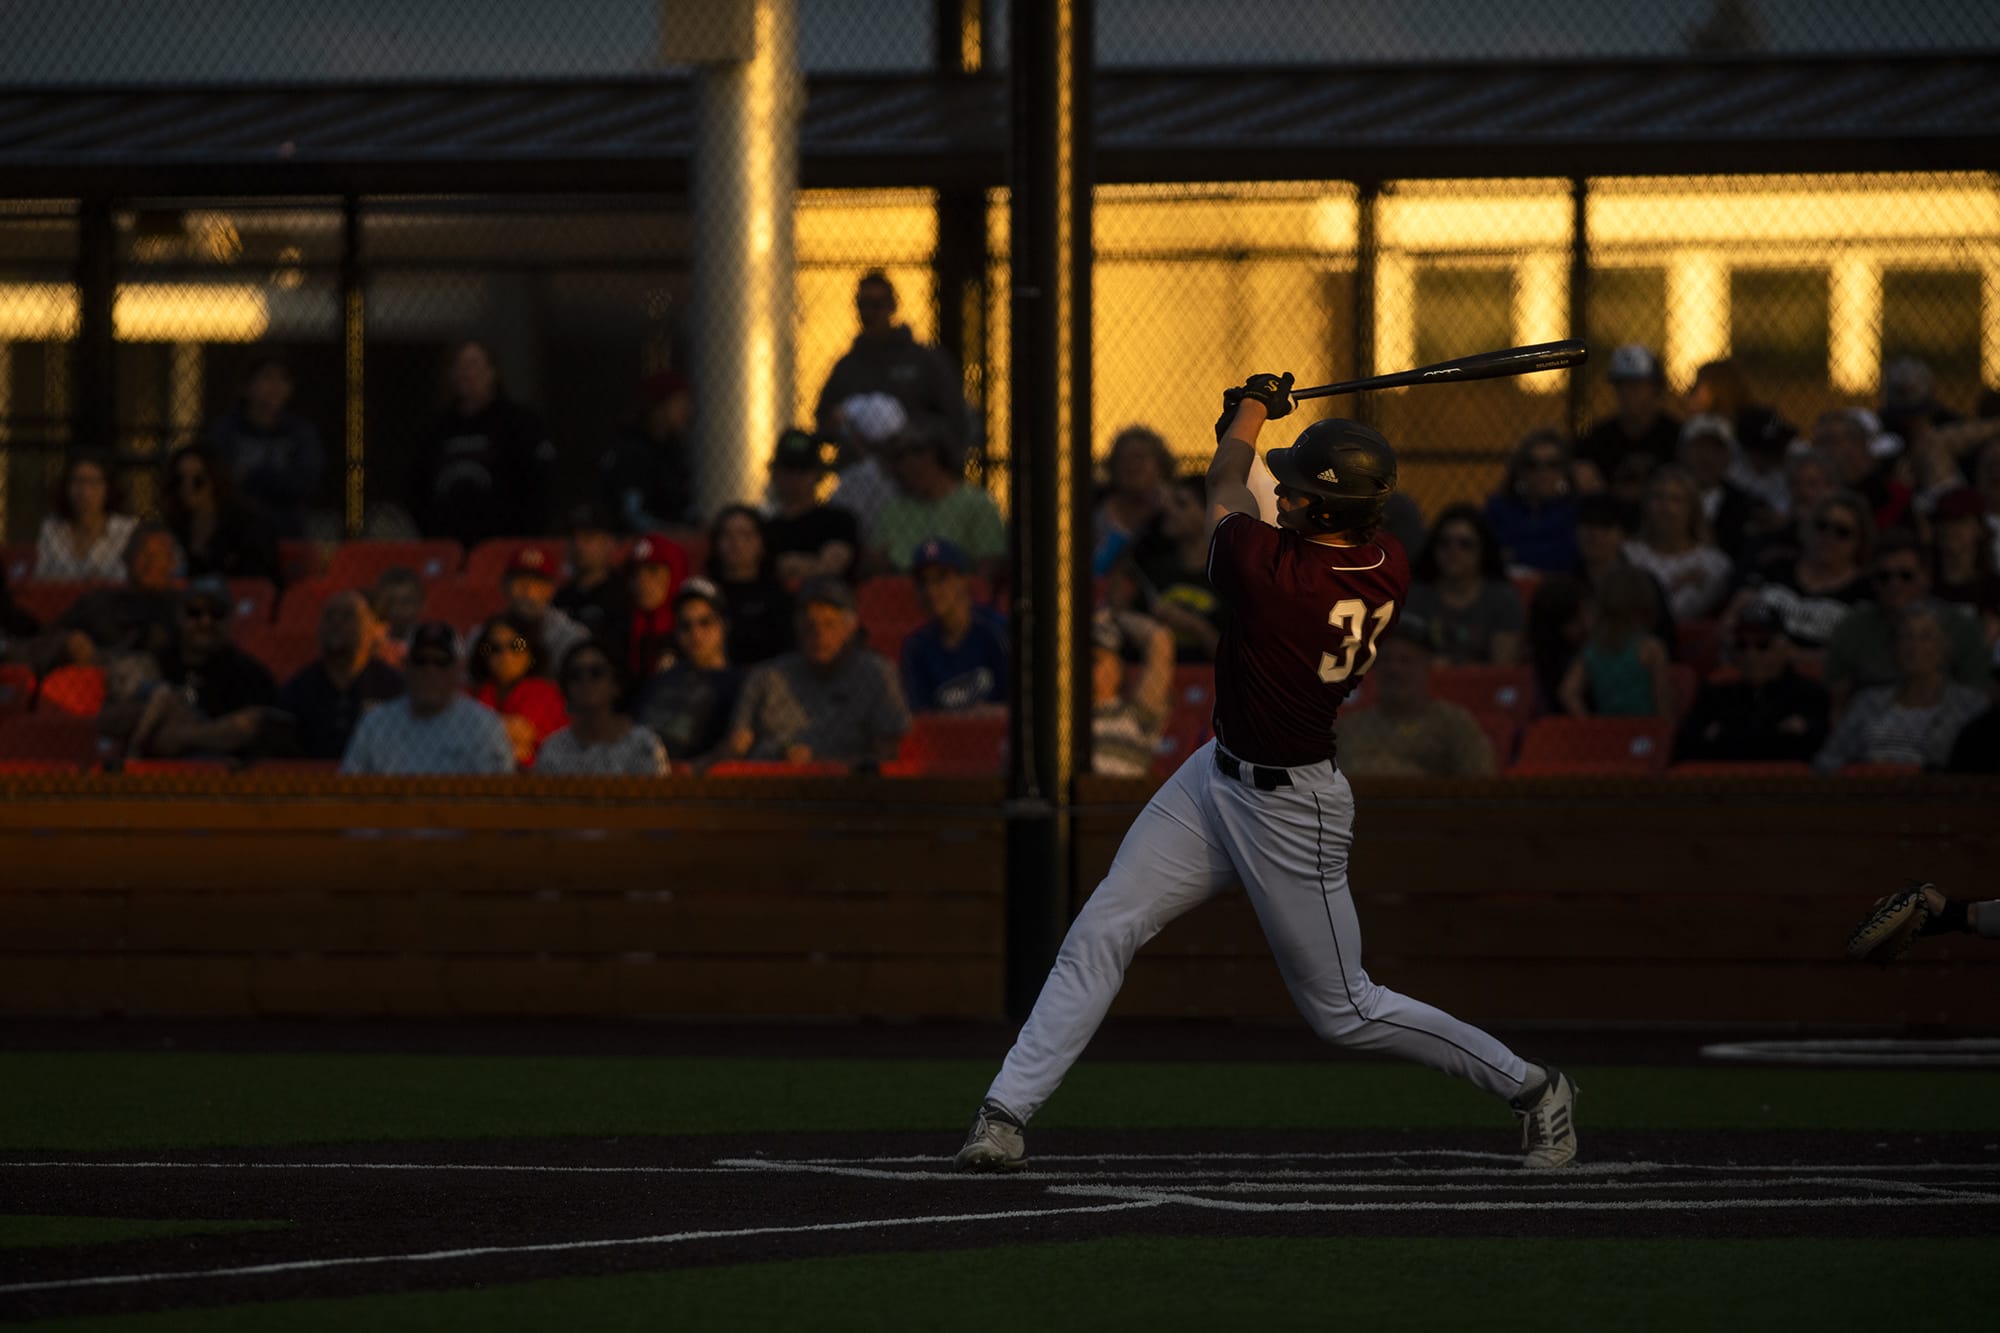 The Ridgefield Raptors' Michael Hicks (31), shown here on Friday, hit a home run on Saturday against the Cowlitz Black Bears.